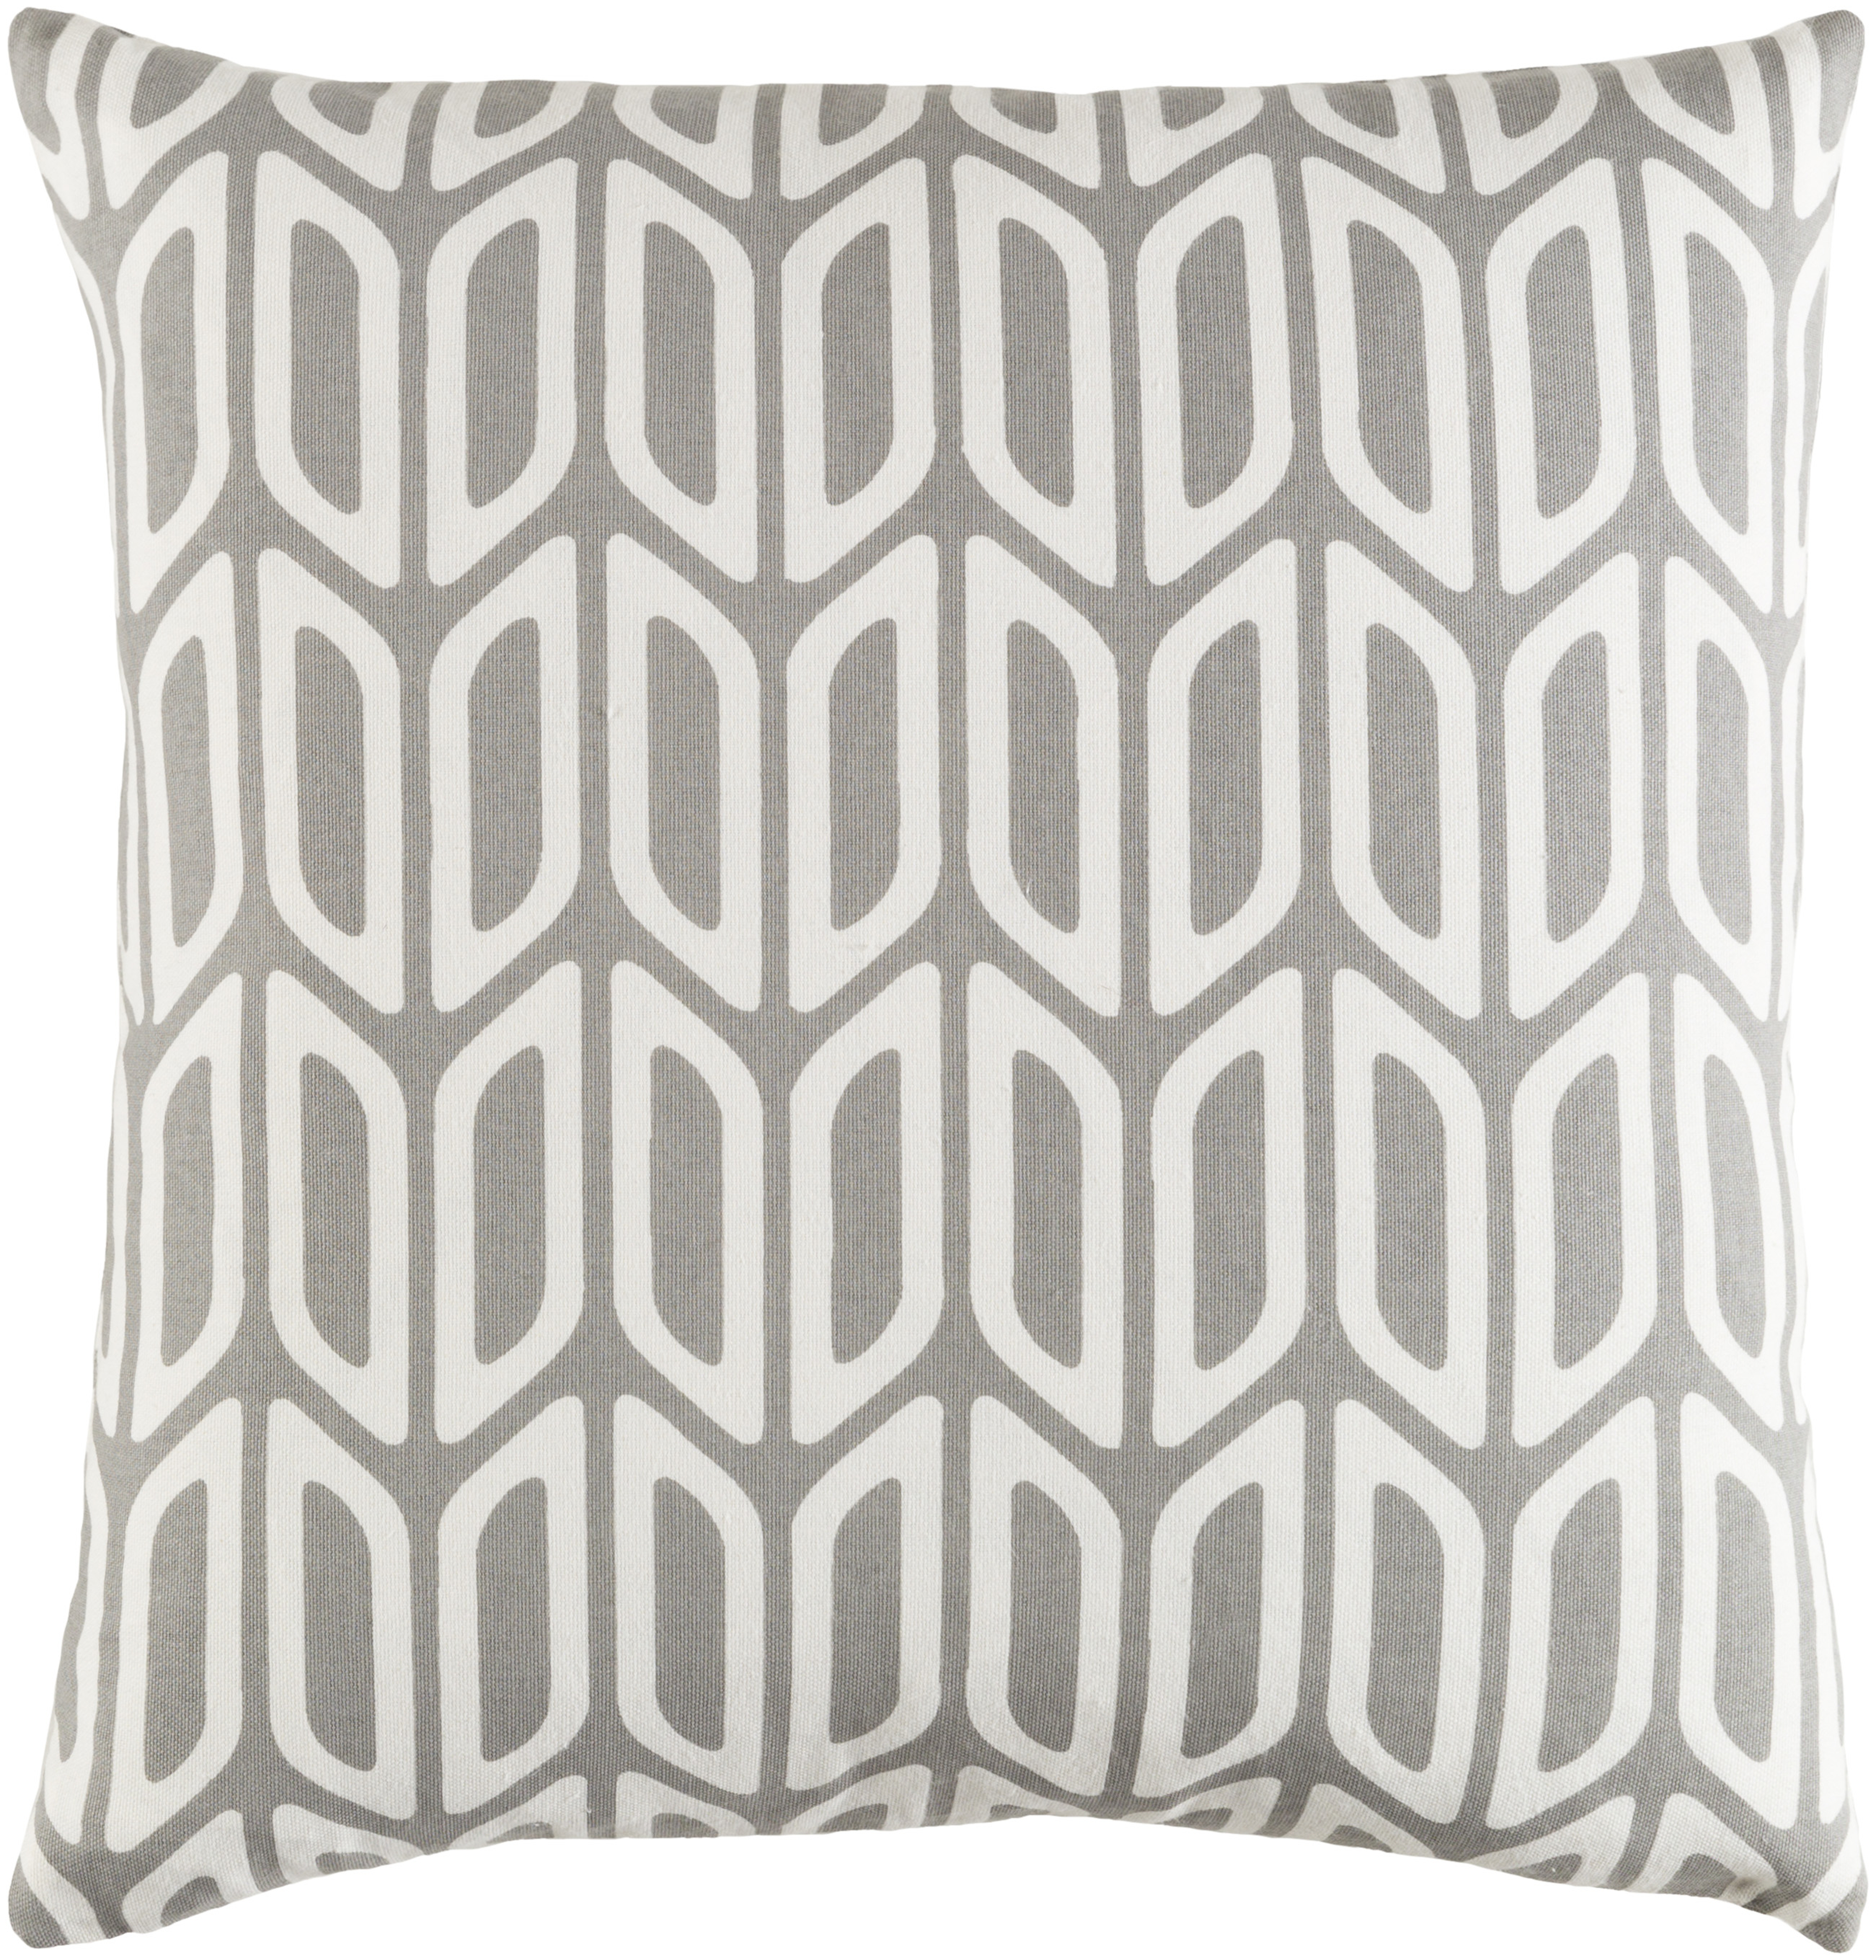 Trudy Throw Pillow, 18" x 18", with down insert - Surya